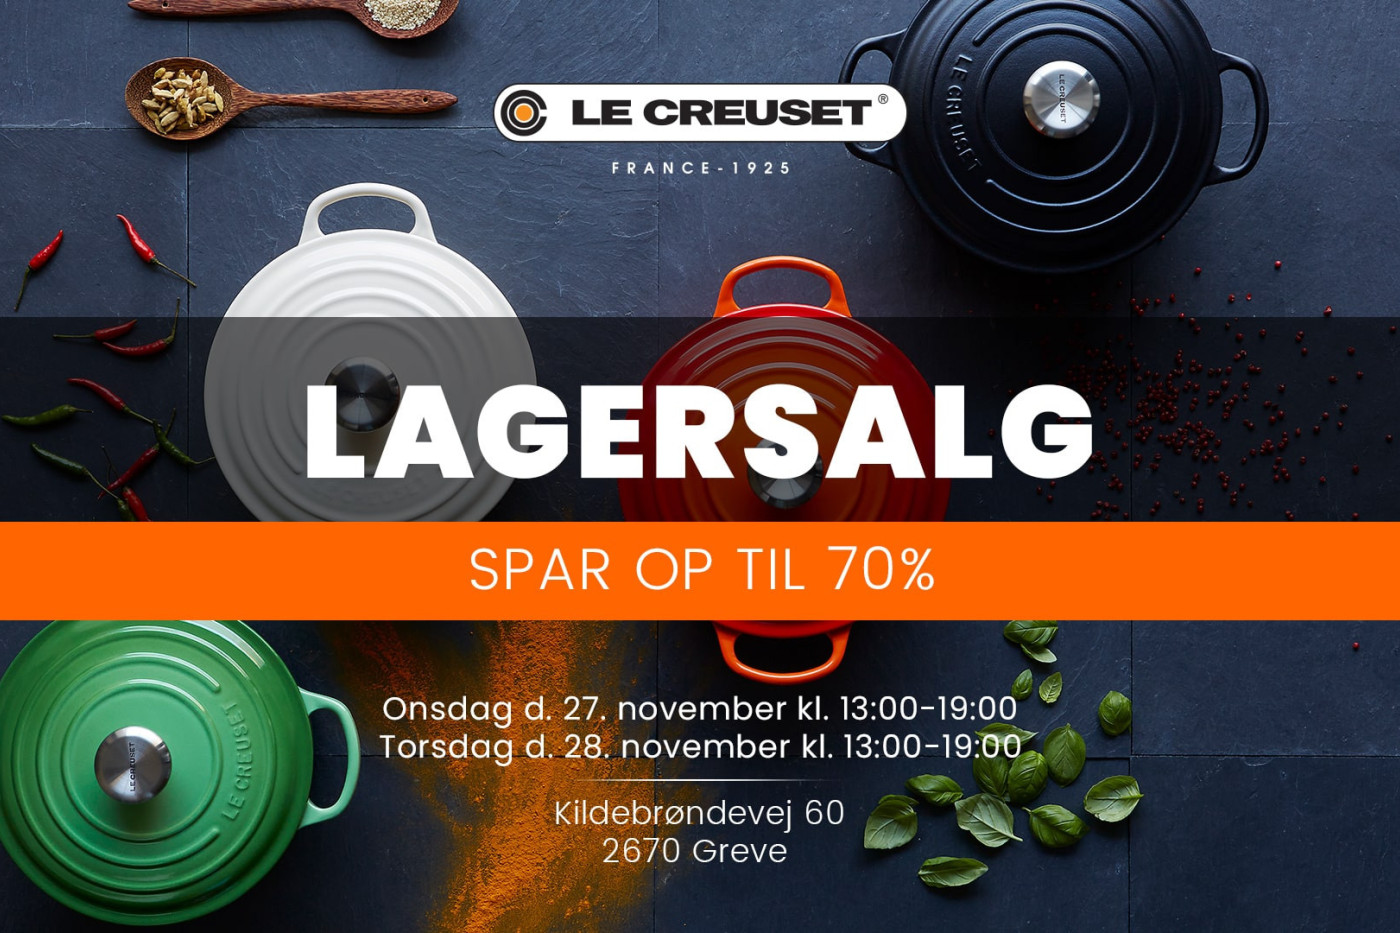 Le Creuset lagersalg